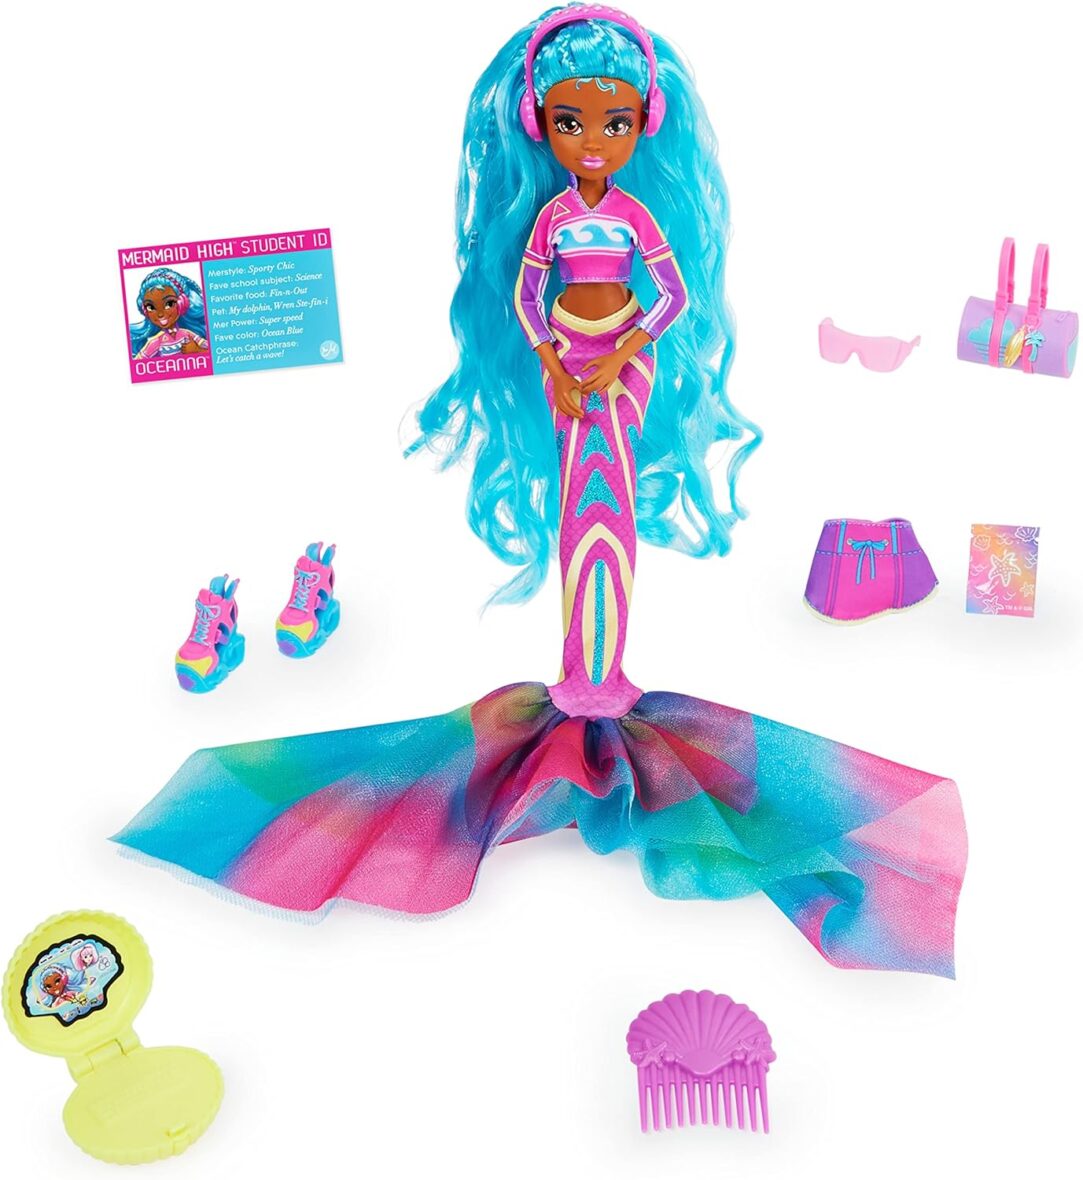 MERMAID HIGH, Oceanna Deluxe Mermaid Doll & Accessories with Removable Tail, Doll Clothes and Fashion Accessories, Kids Toys for Girls Ages 4 and Up